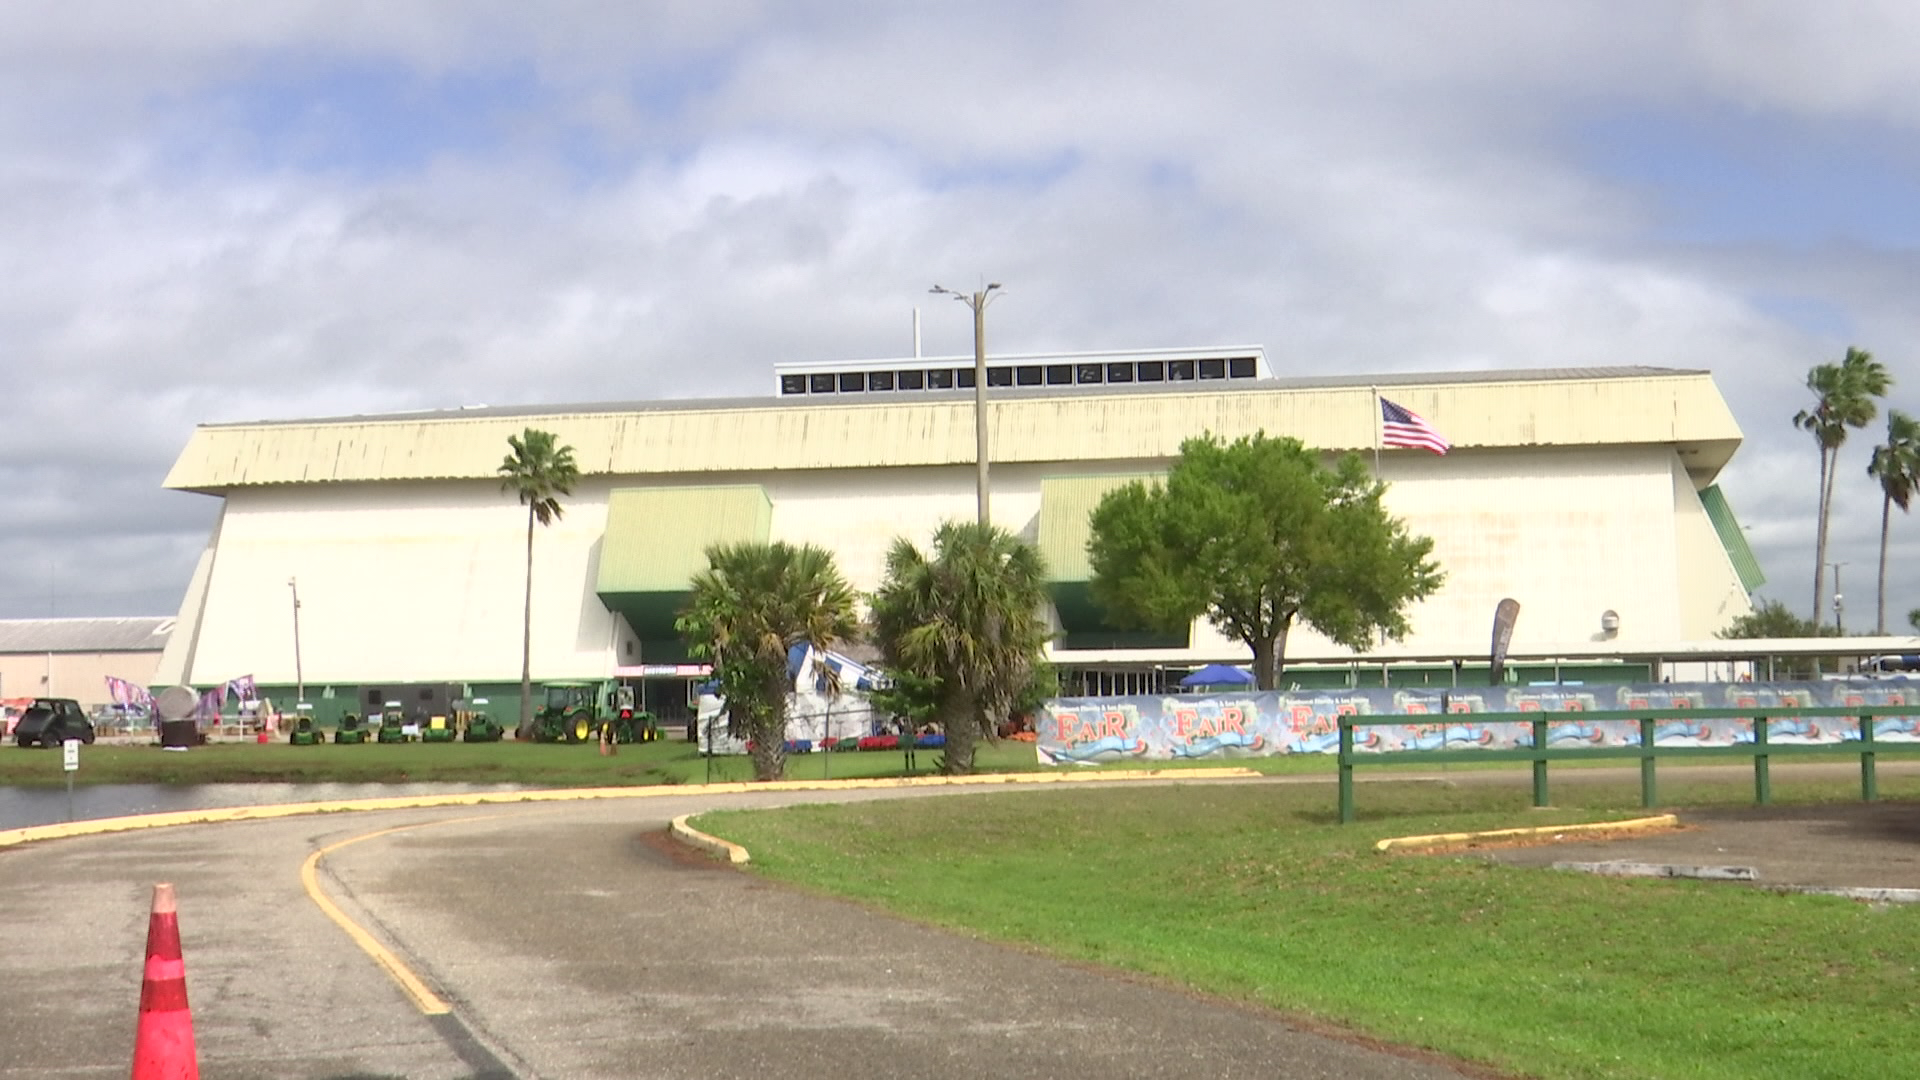 The future of the Lee Civic Center in question